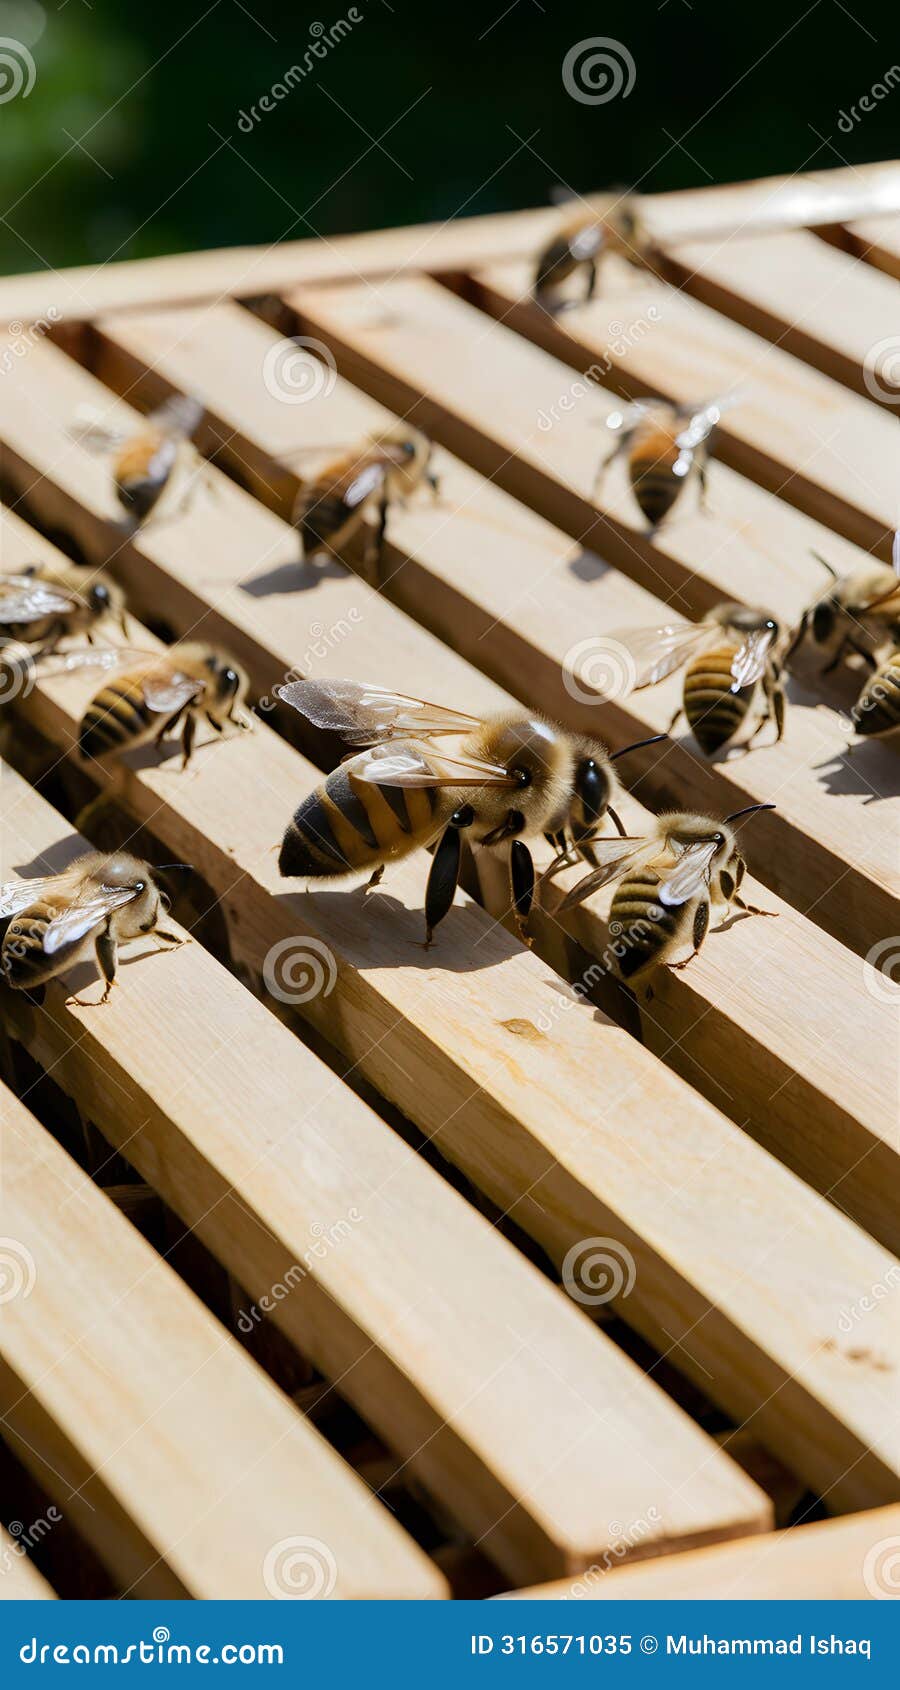 working bees diligently attend to honeycomb frames within bee hive